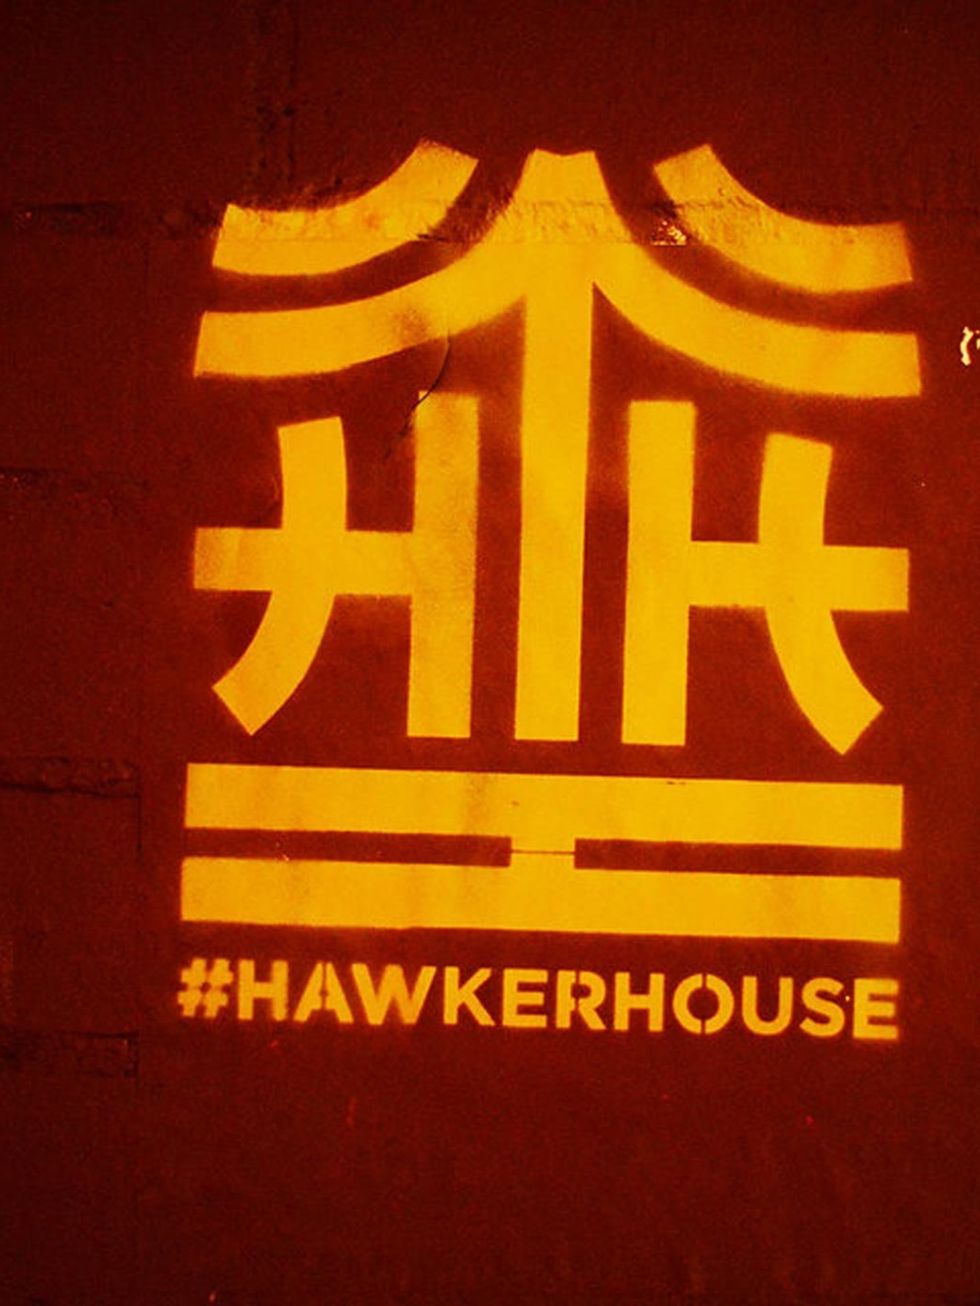 &lt;p&gt;An indoor night market filled with food and music? Yes please! Introducing &lt;a href=&quot;http://www.streetfeastlondon.com/&quot;&gt;Hawker House&lt;/a&gt;, a foodie haven stocked with the finest grub from all over the world. Opens this Friday 